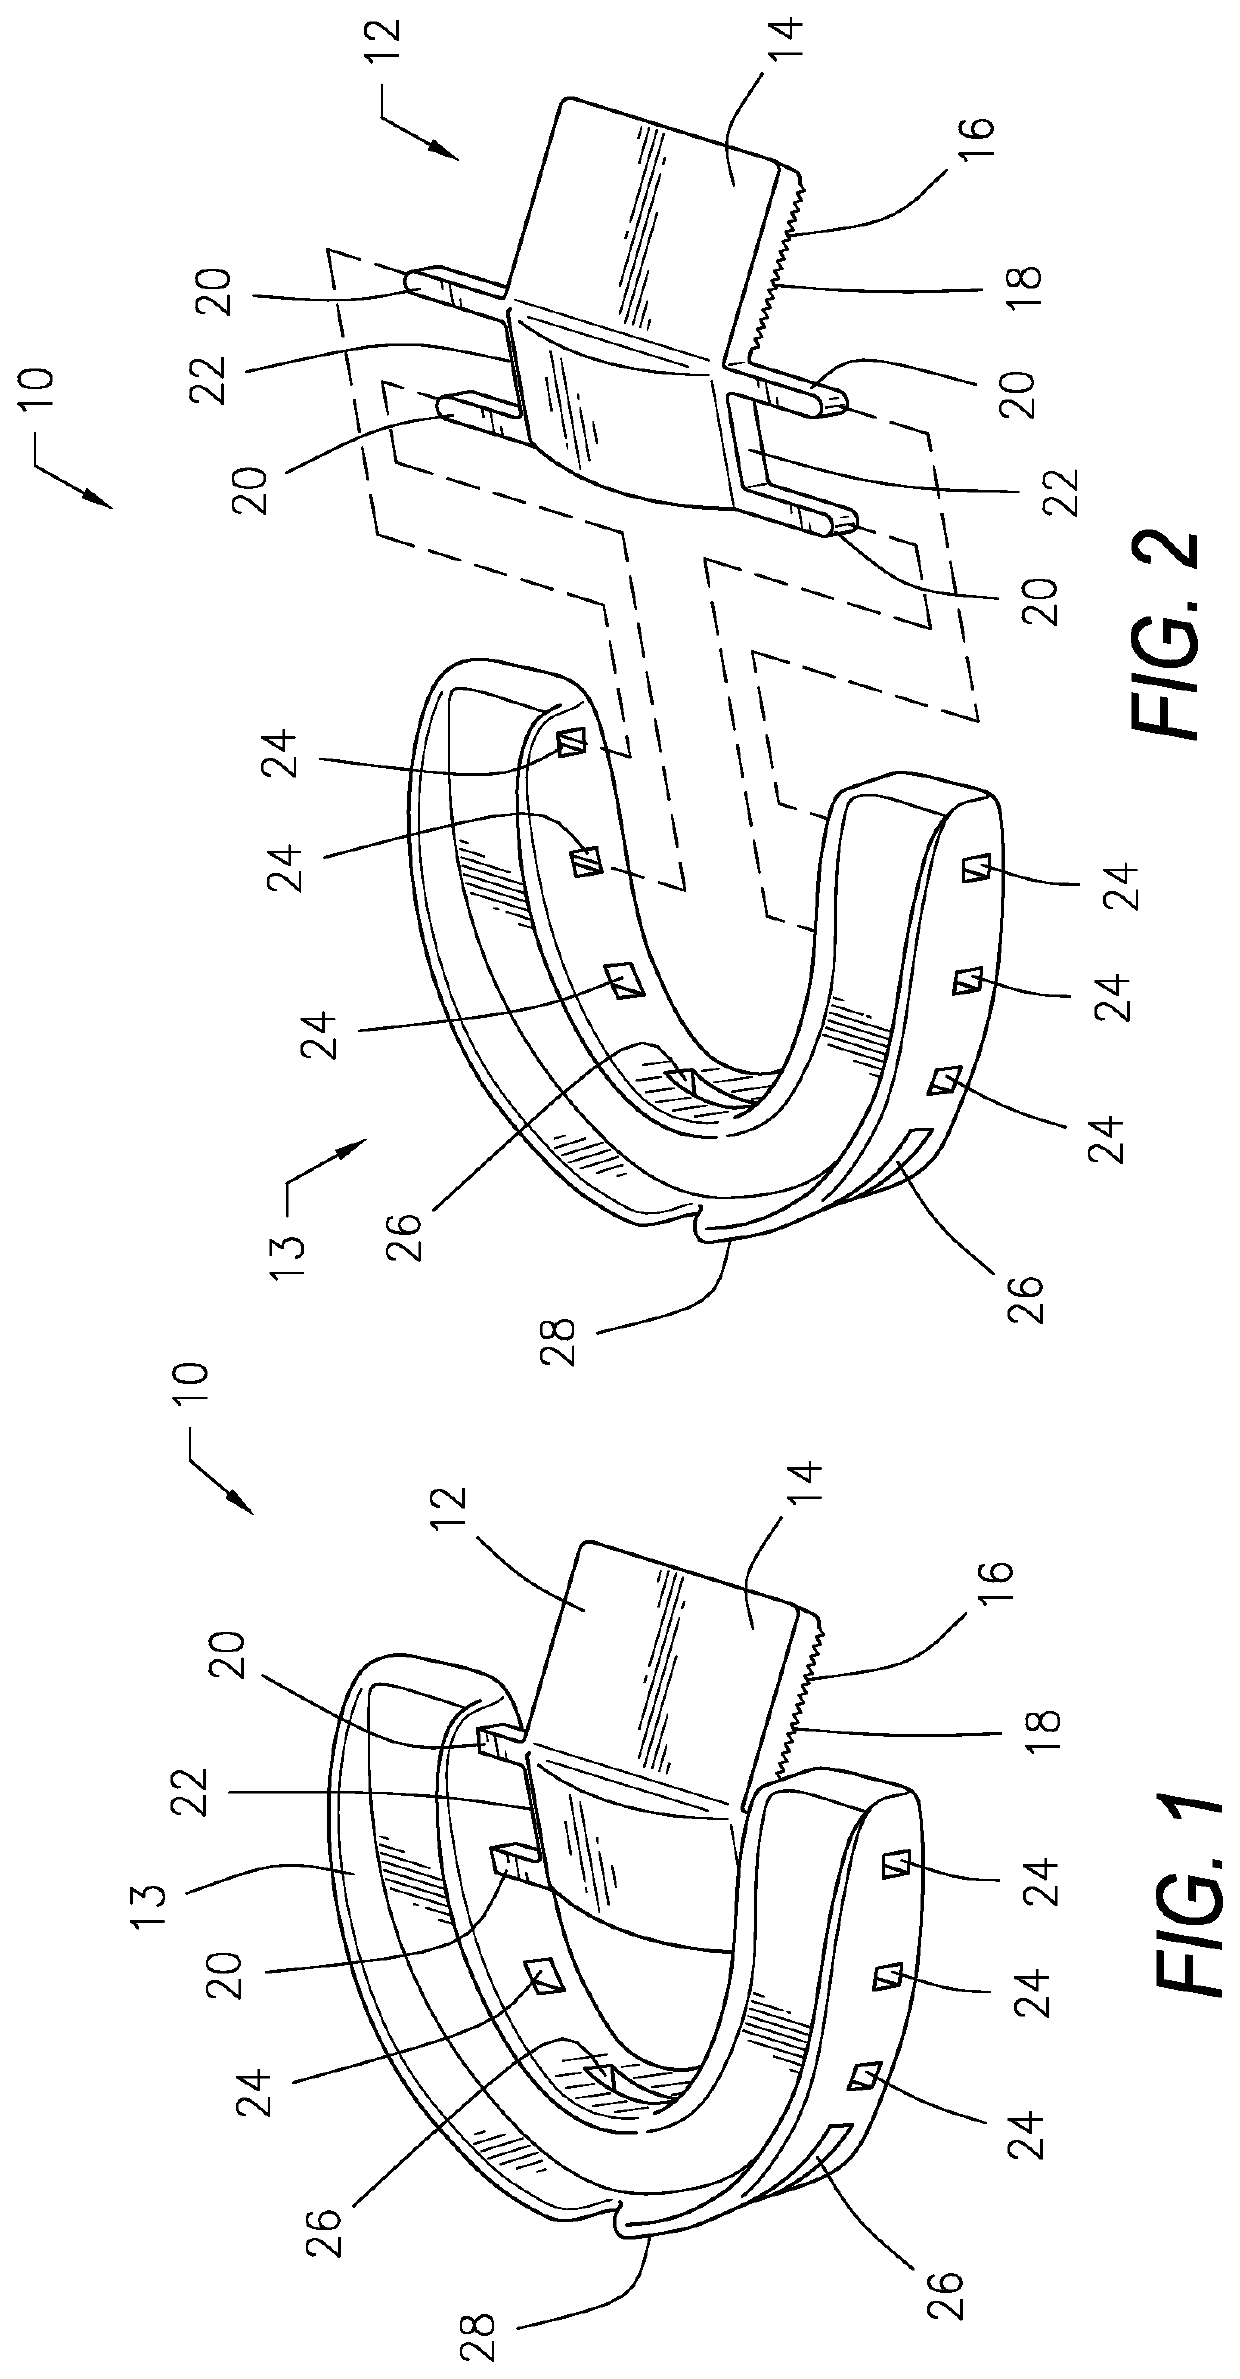 Device to prevent snoring